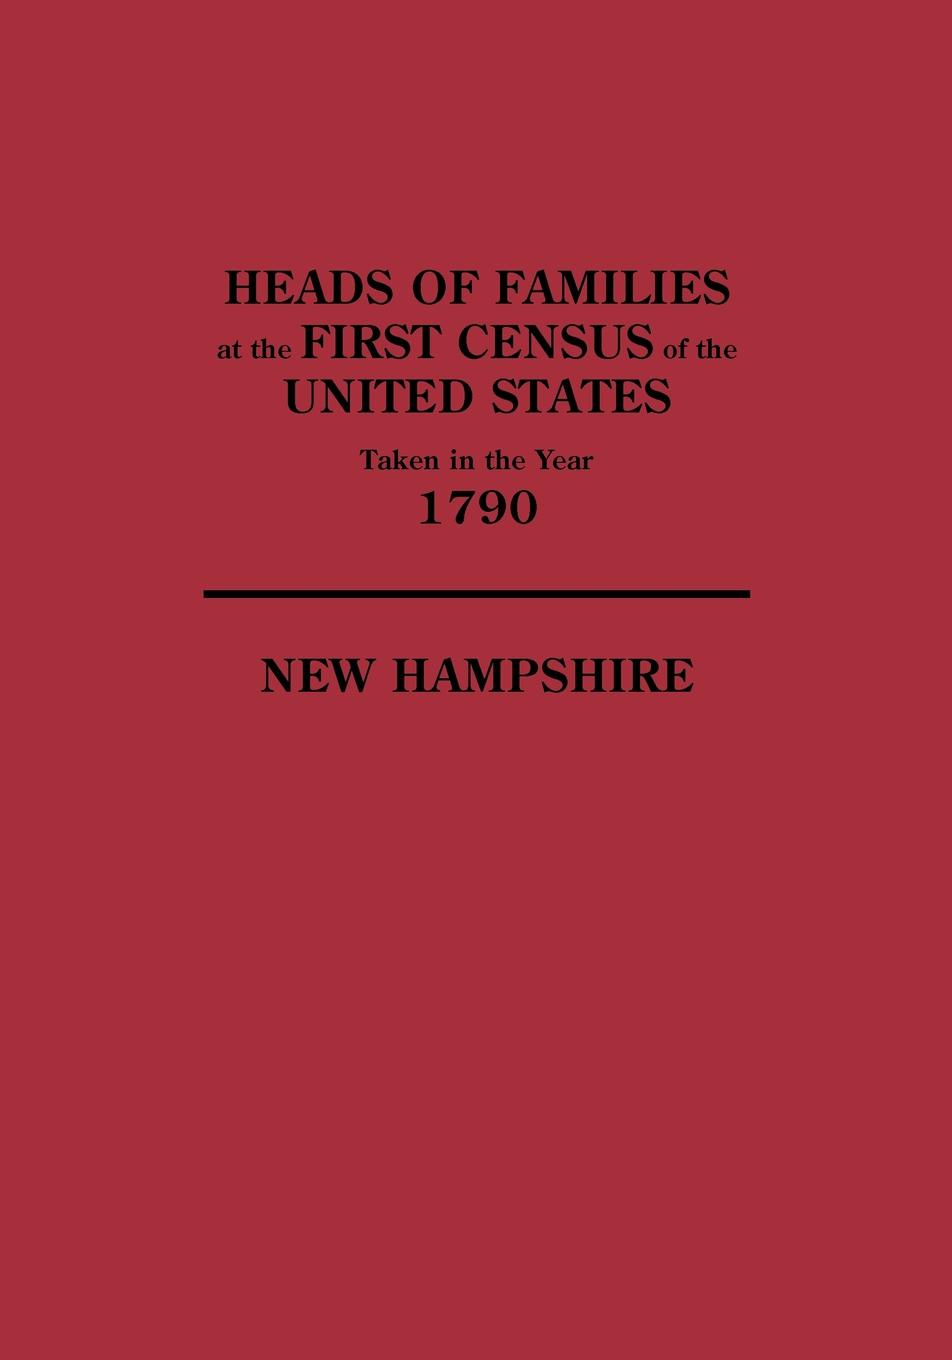 Heads of Families at the First Census of the United States Taken in the Year 1790. New Hampshire